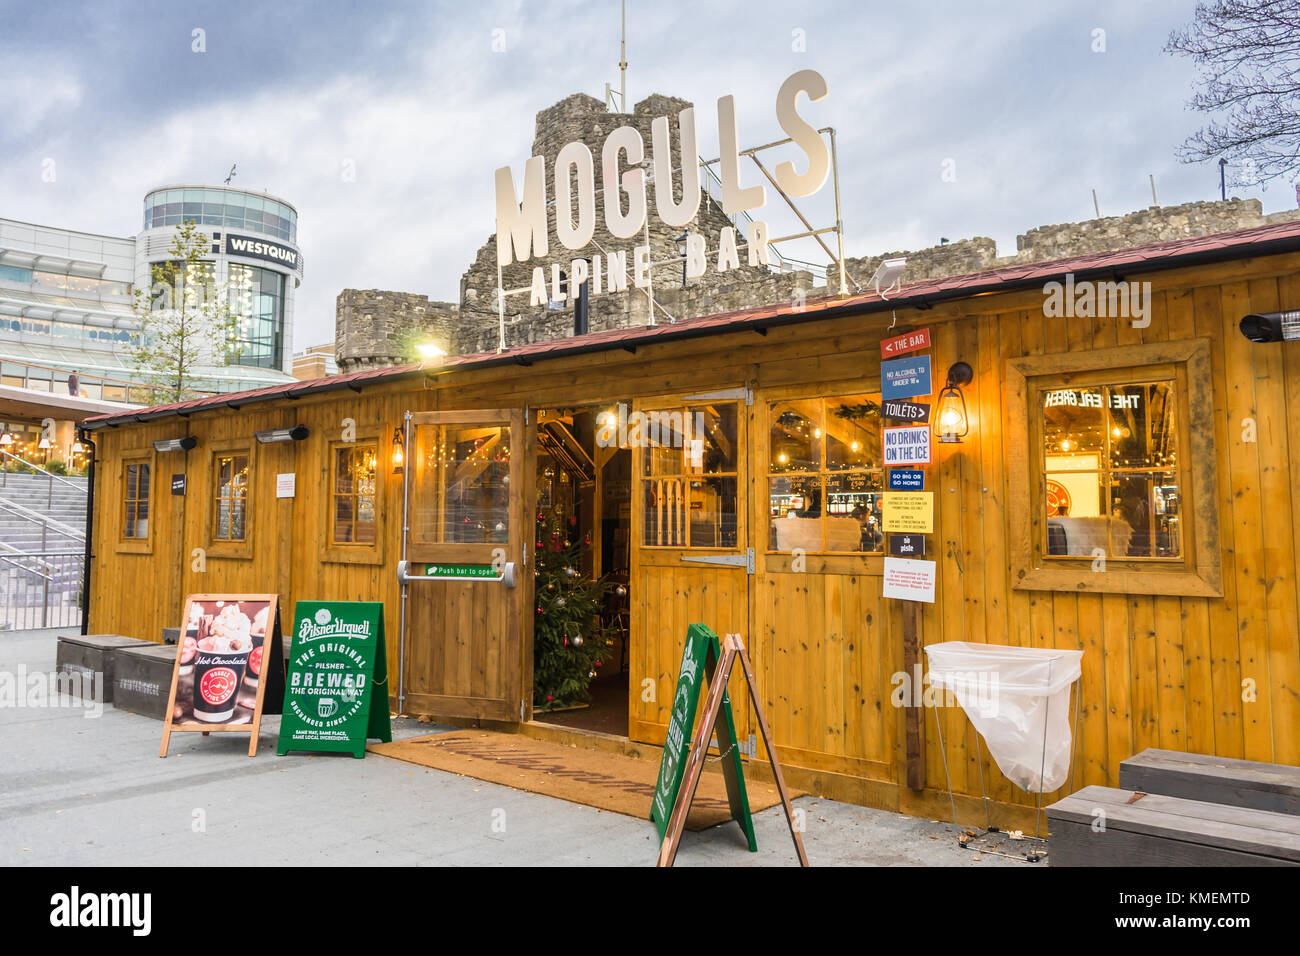 Moguls Alpine style bar temporarily erected in Southampton City Centre as part of the Christmas festivities in 2017, Southampton, England, UK Stock Photo